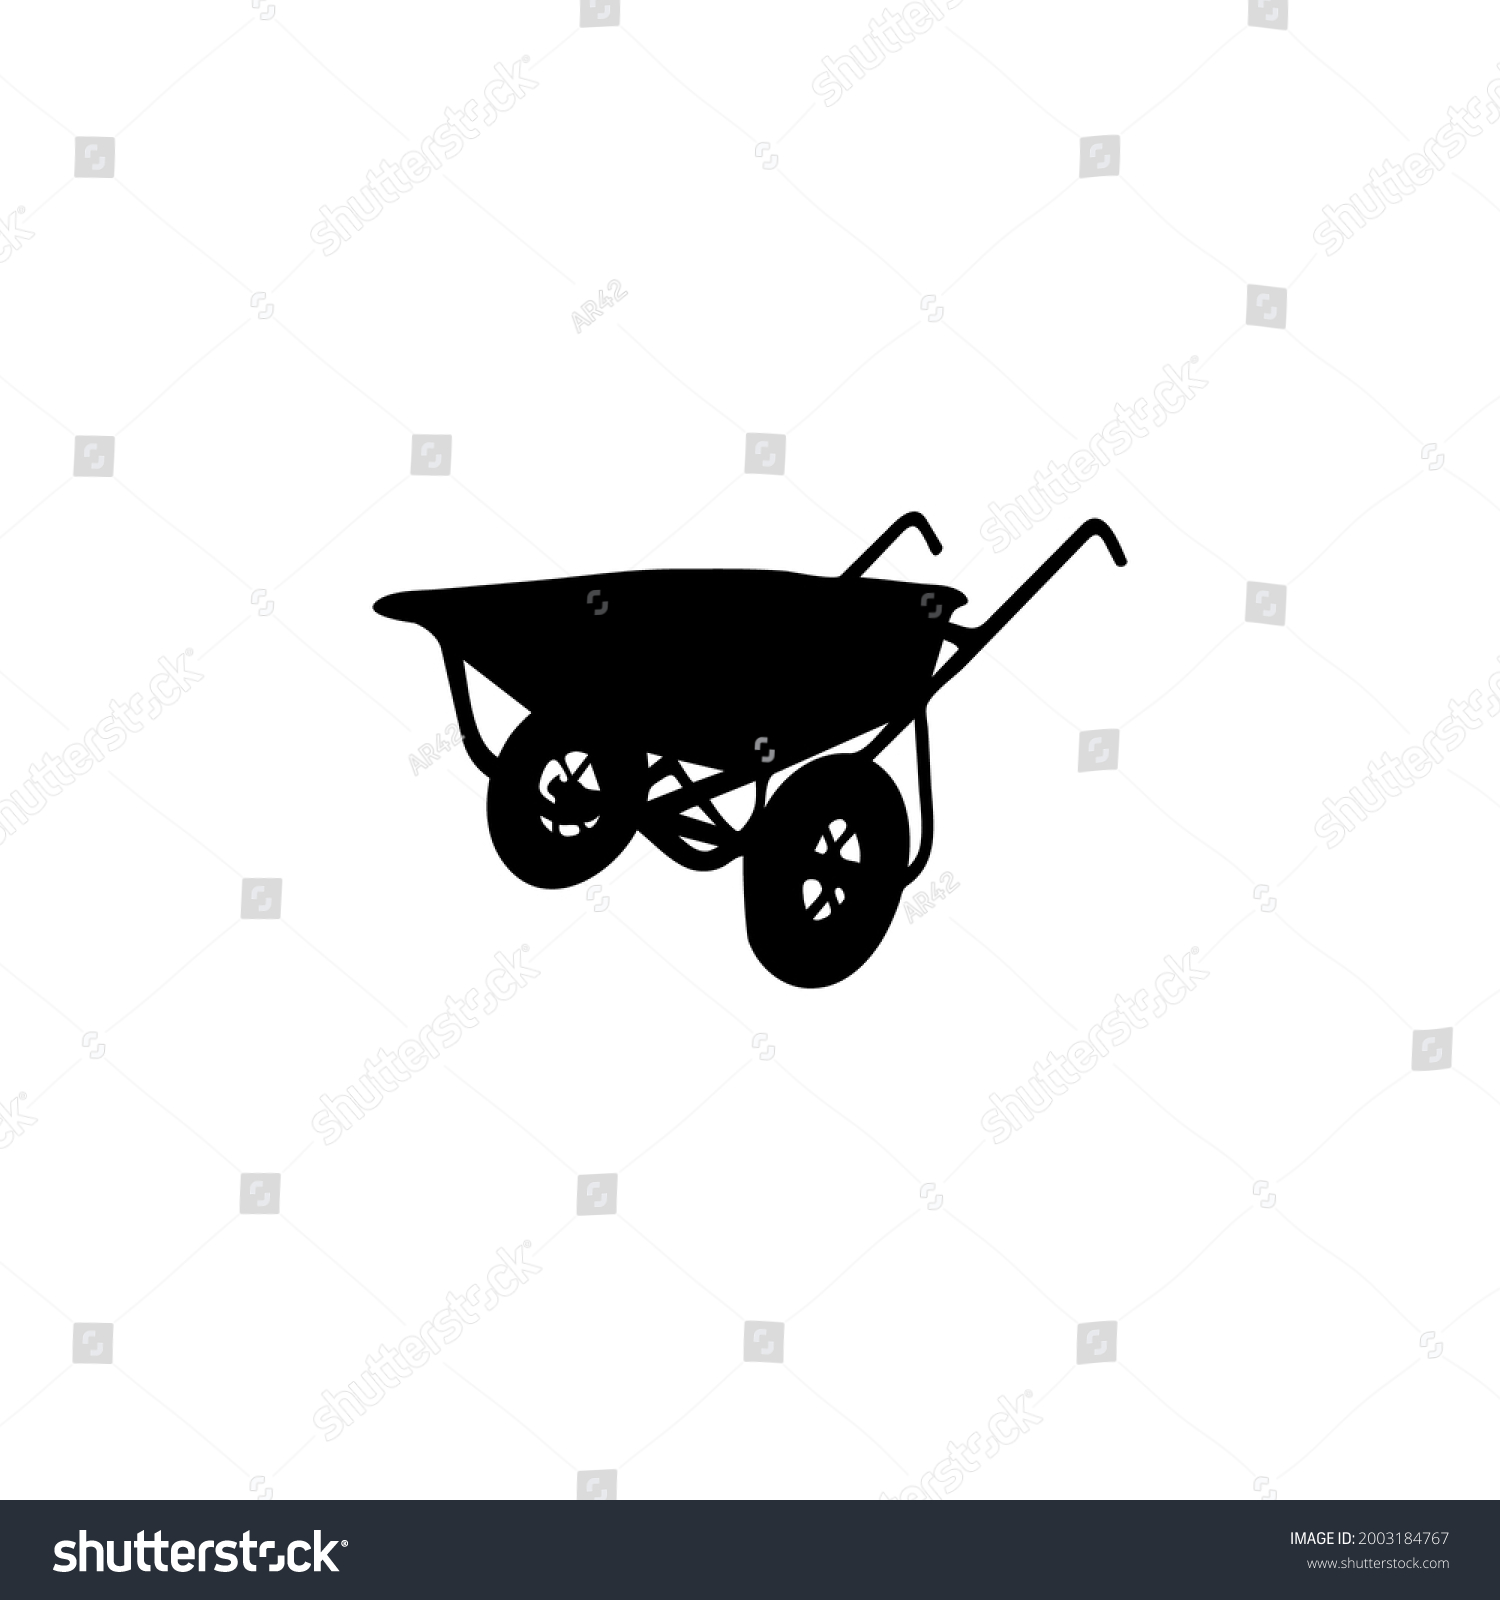 SVG of wheelbarrow icon - wagon wheel sign symbol vector illustration. construction equipment silhouette isolated on a white background svg